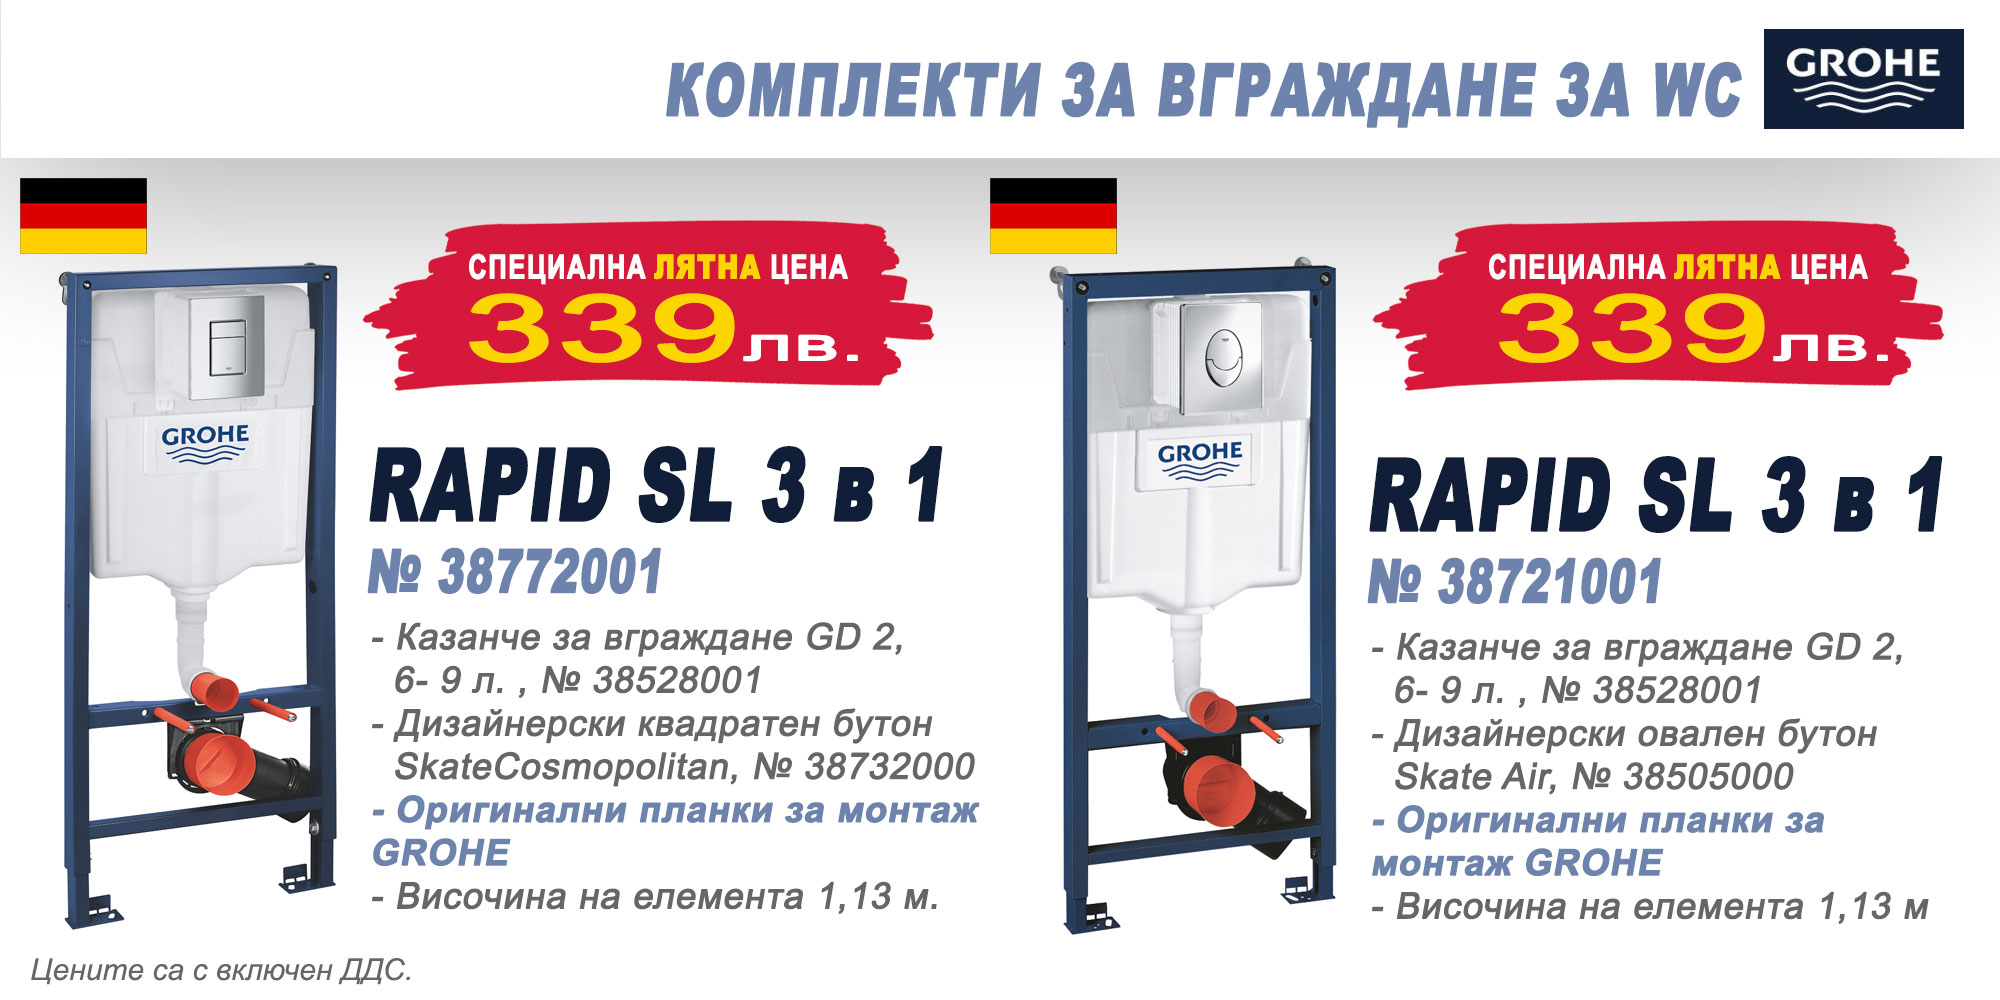 GROHE RAPID SL 3 in 1 built-in set at a special price